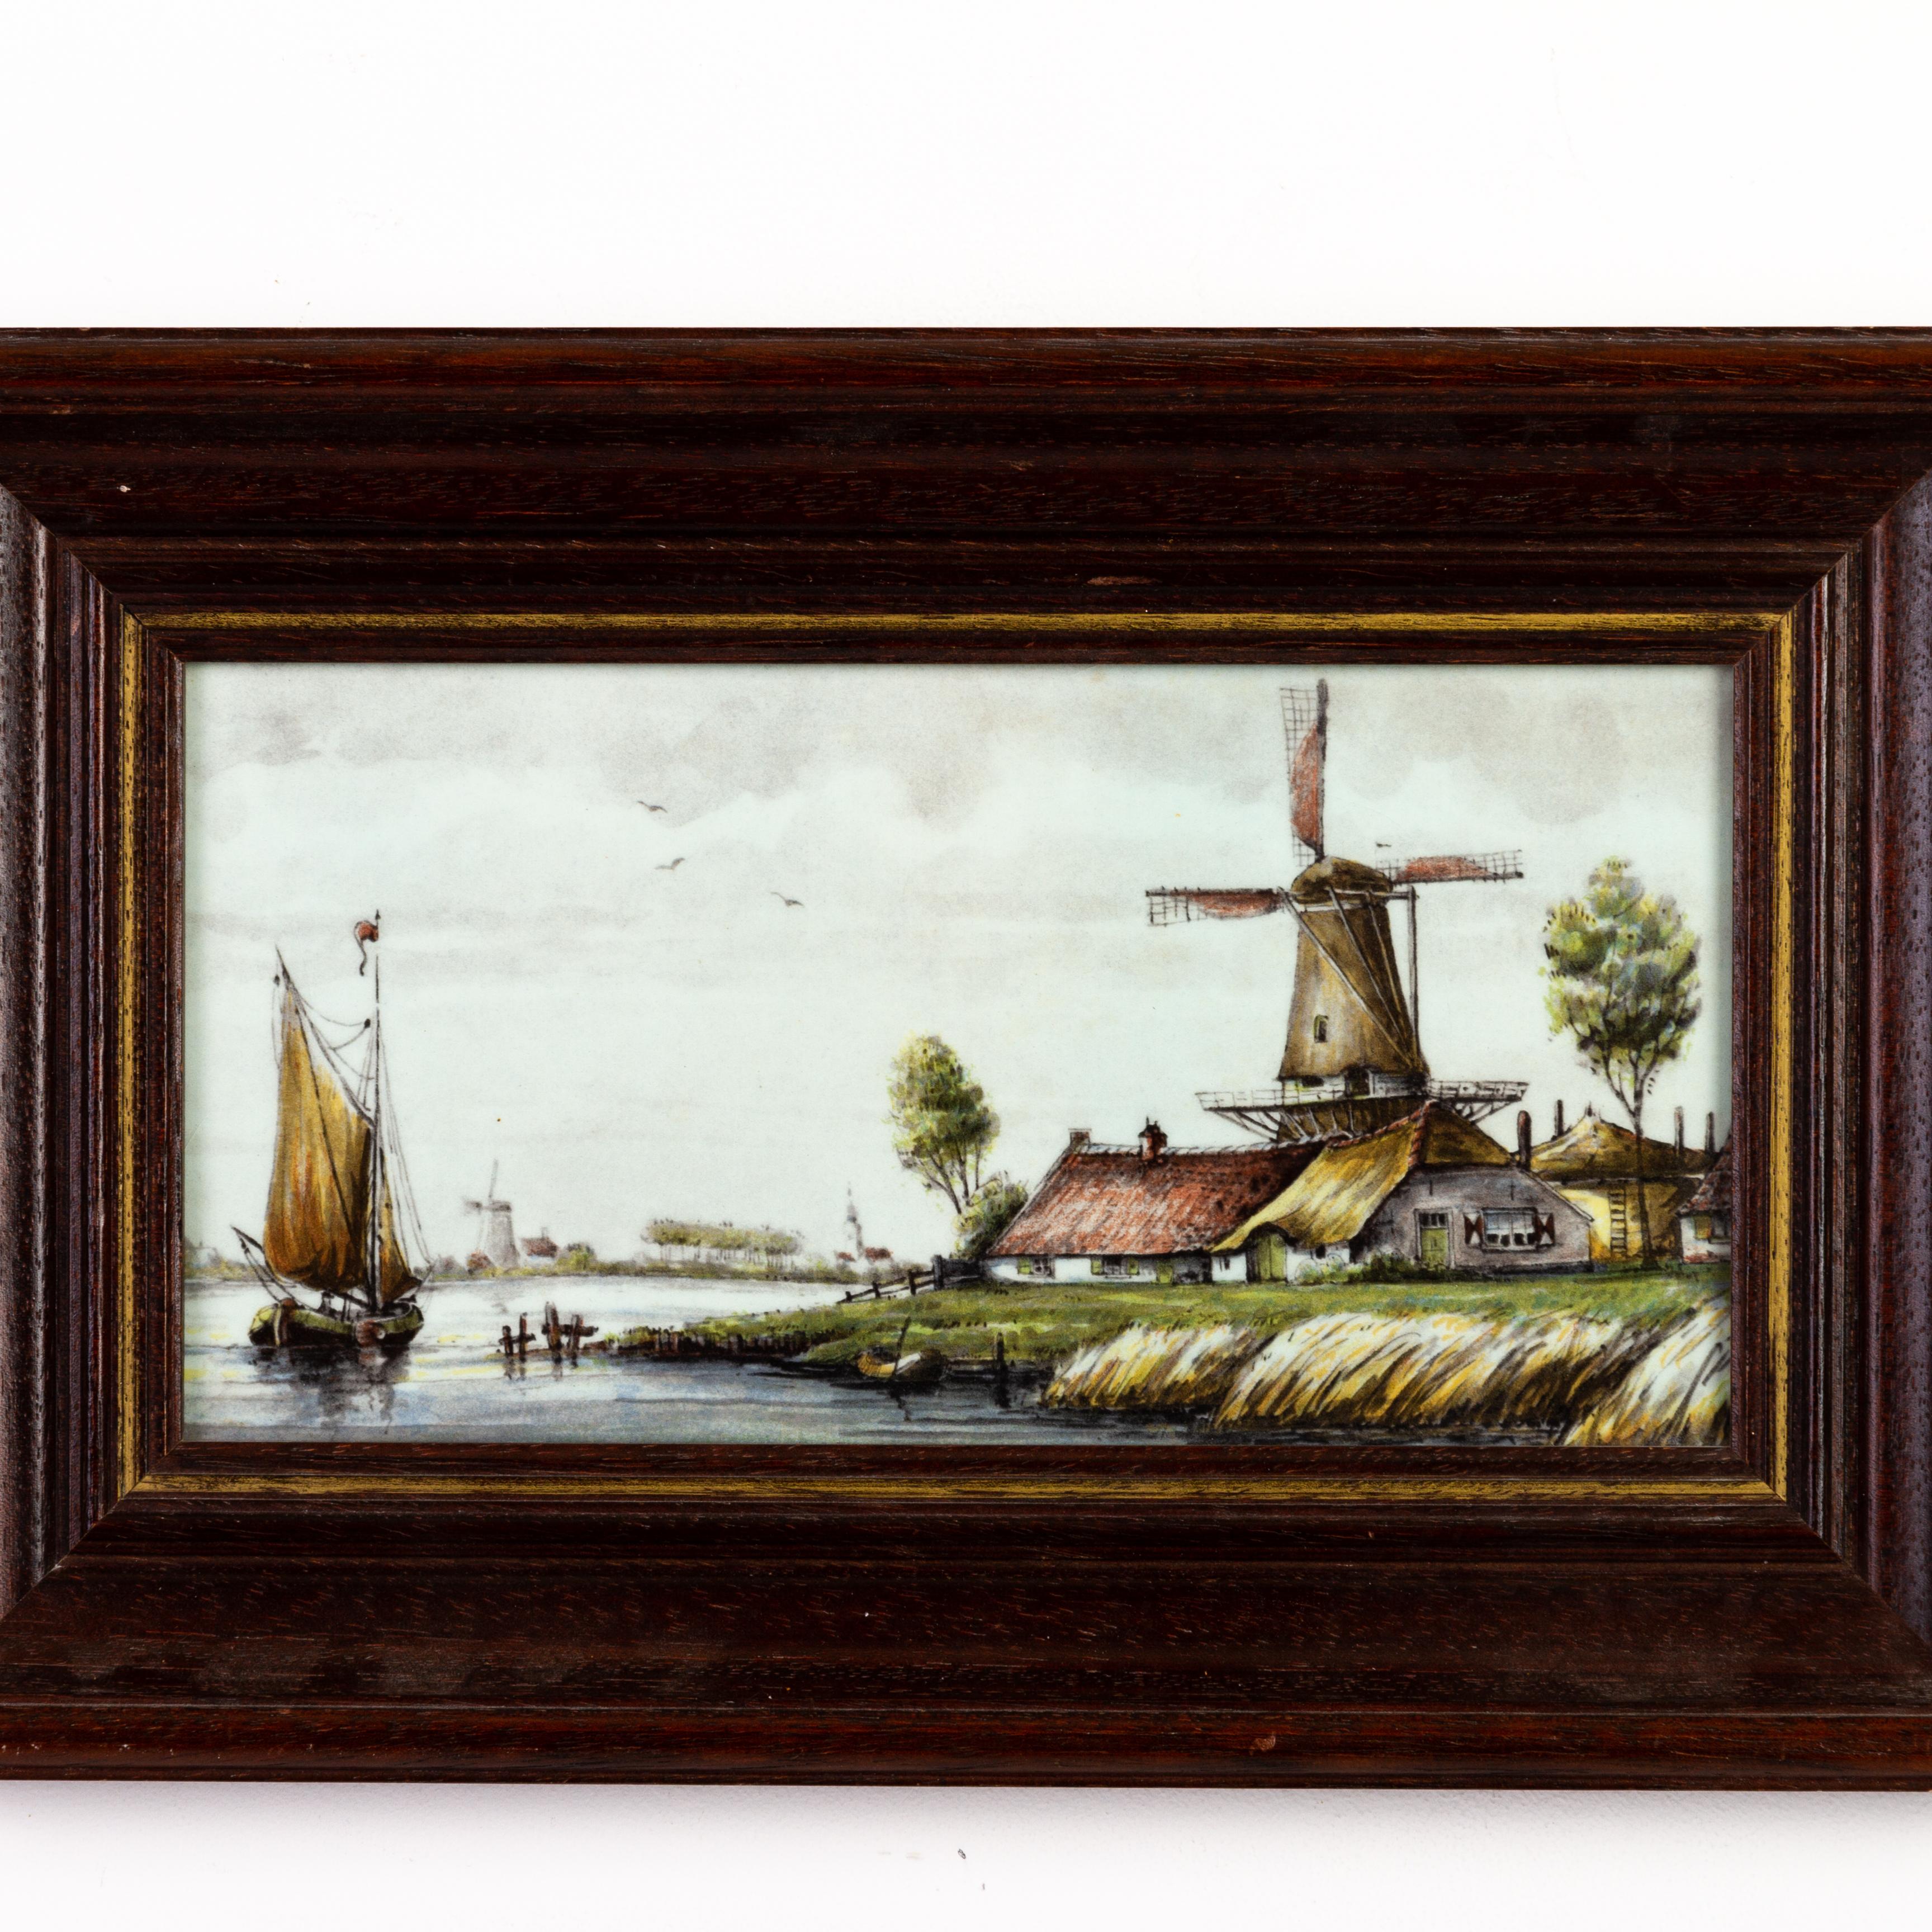 In good condition
From a private collection
Free international shipping
Delft Dutch Polychrome Plaque of 17th Century Windmill 